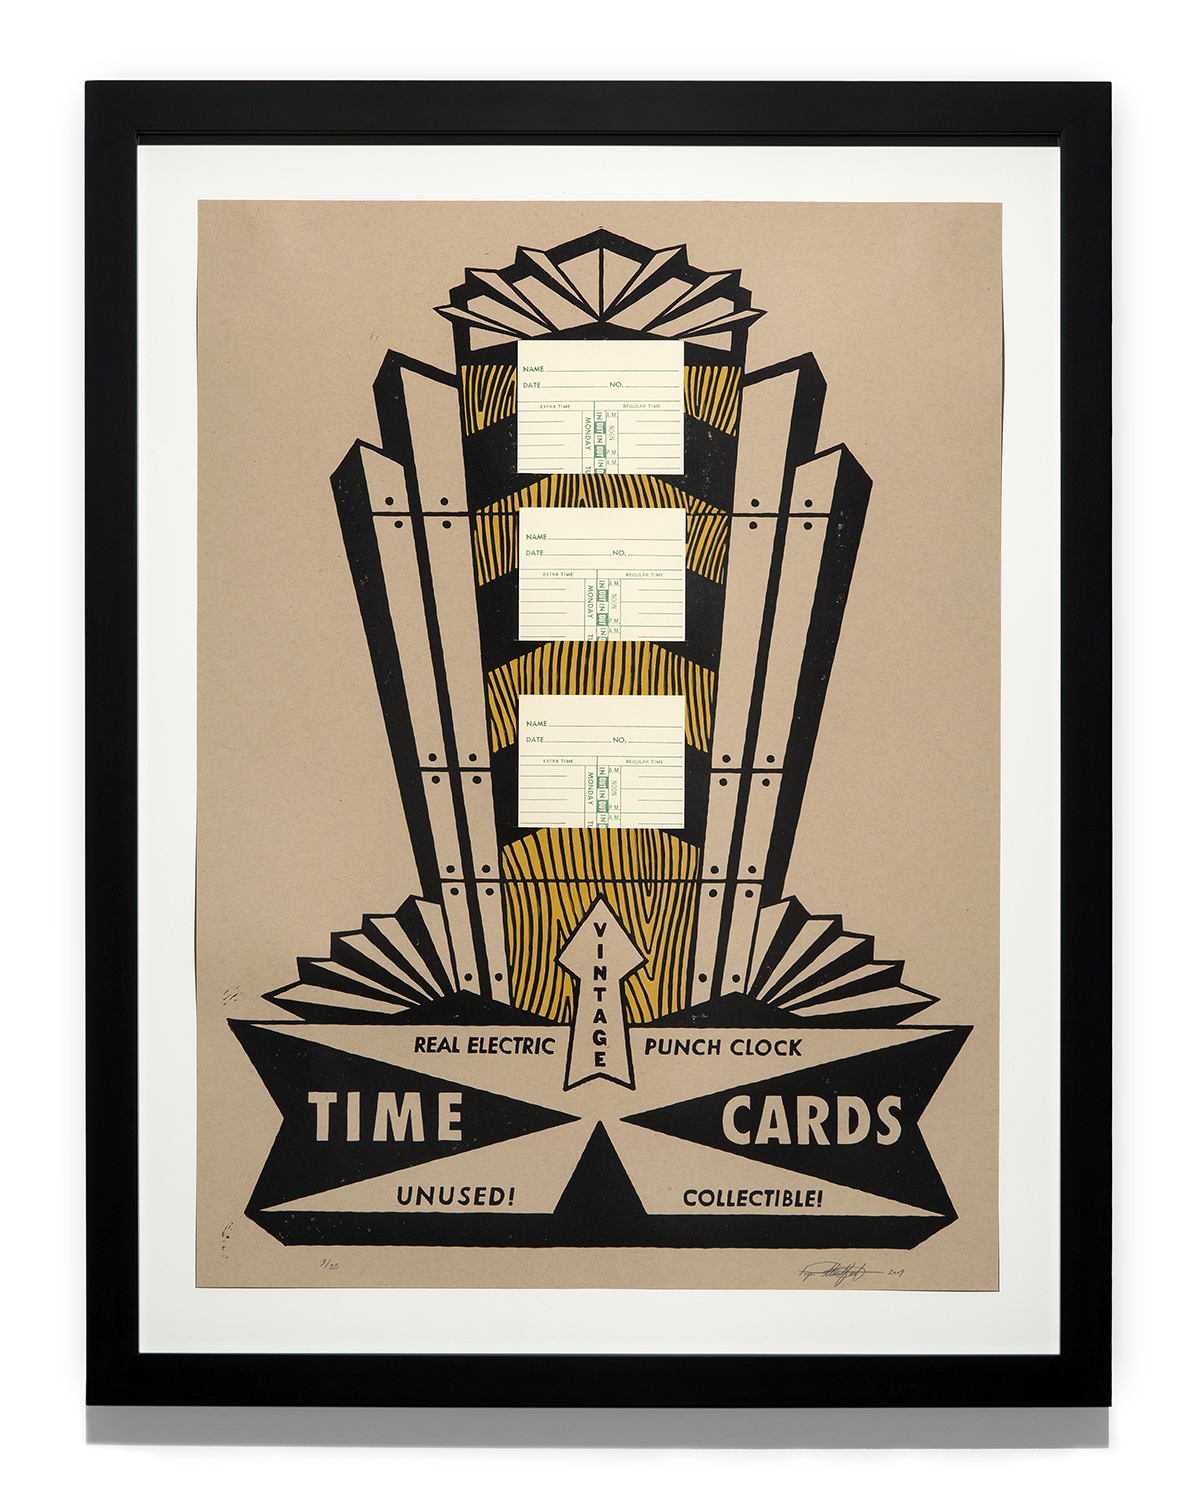 VINTAGE TIME CARDS / relief print with hand coloring and collage / 23 x 17 inches, edition of 25 / 2019